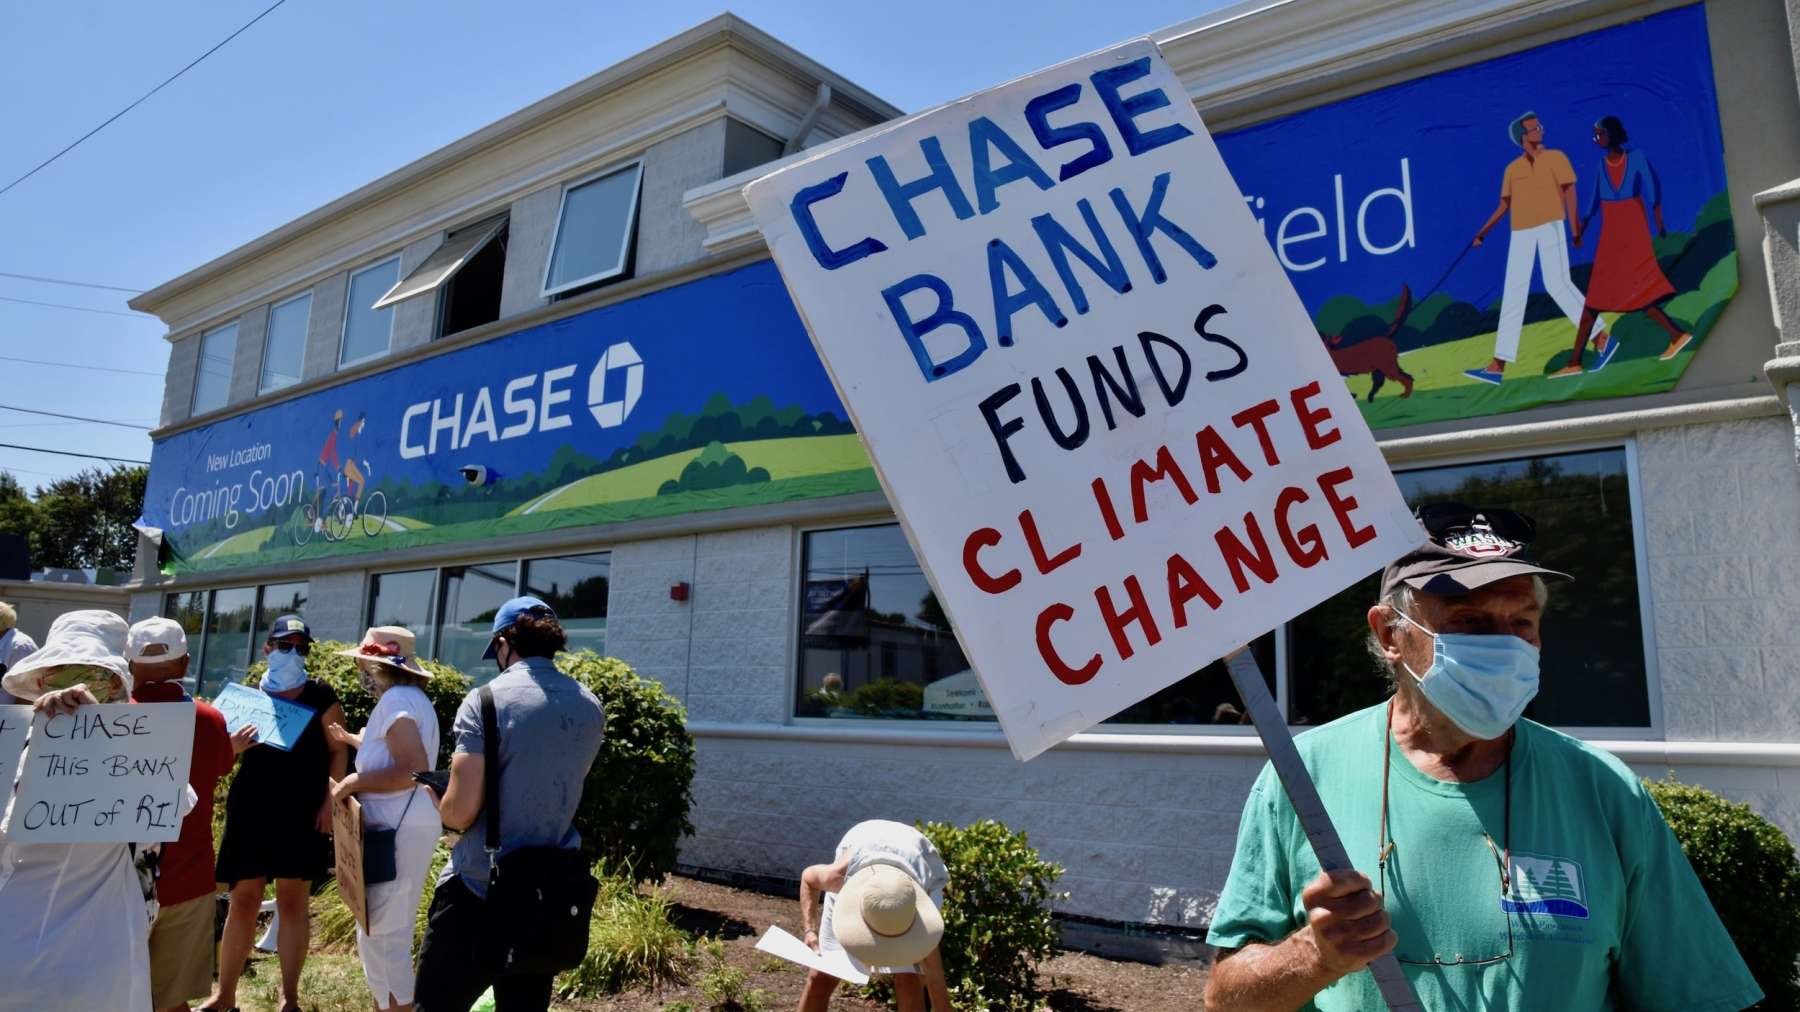 Rhode Island News: Activists protest new Chase Bank location in Wakefield